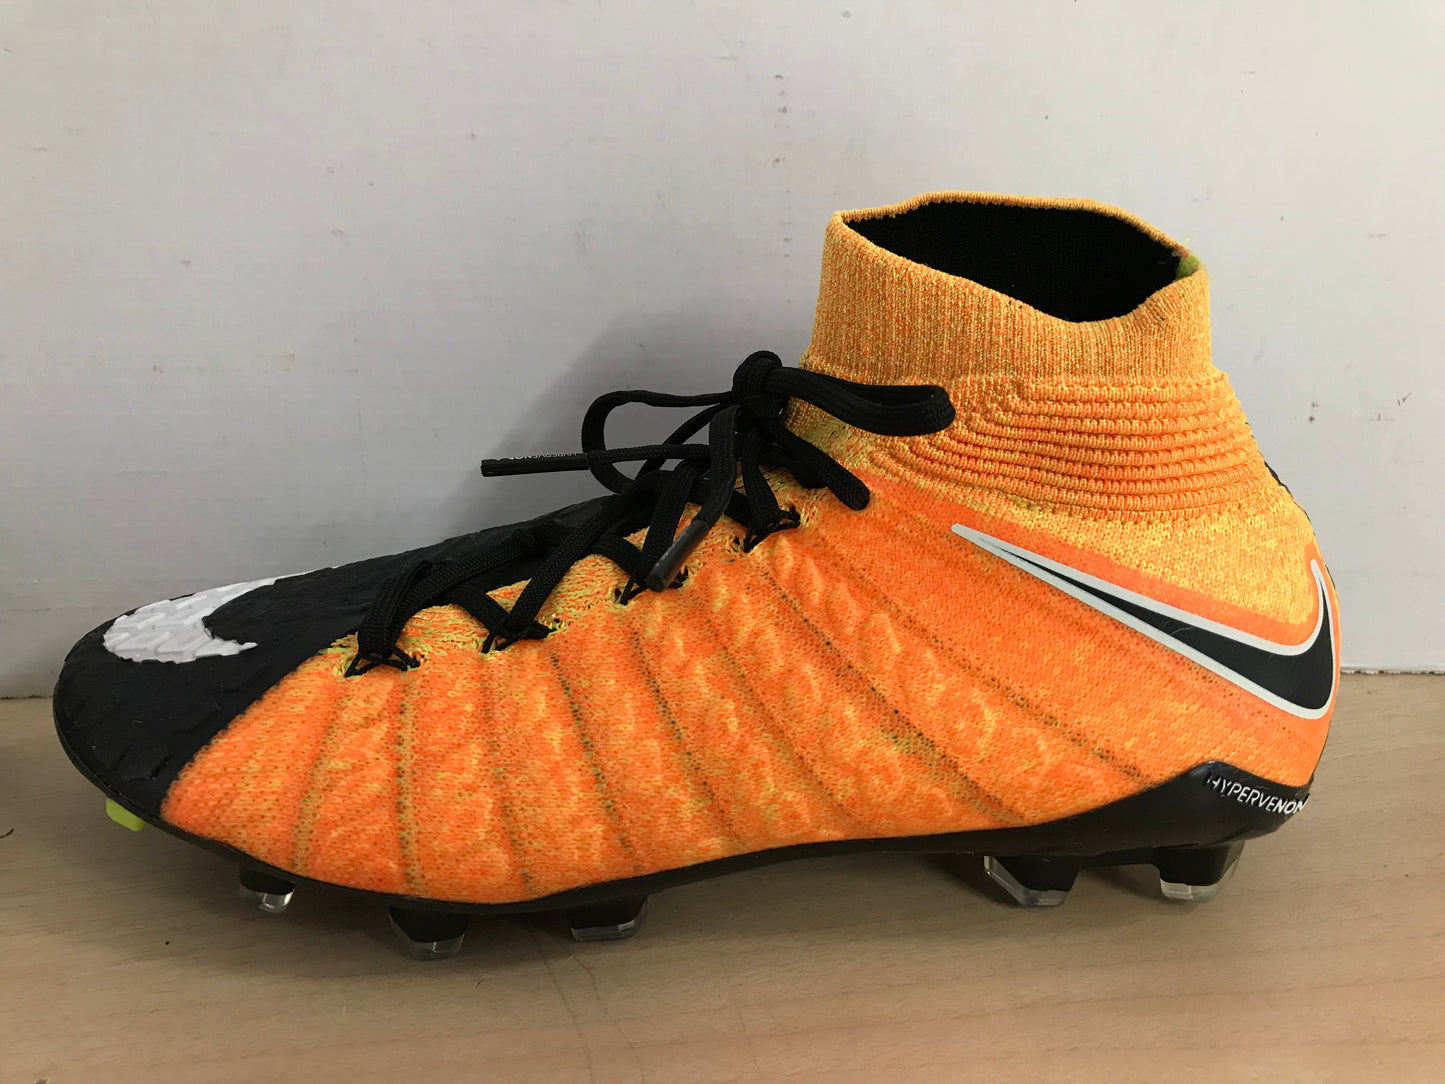 Soccer Shoes Cleats Child Size 6 Nike Flykniti Slipper Foot Youth Black Orange Yellow Excellent